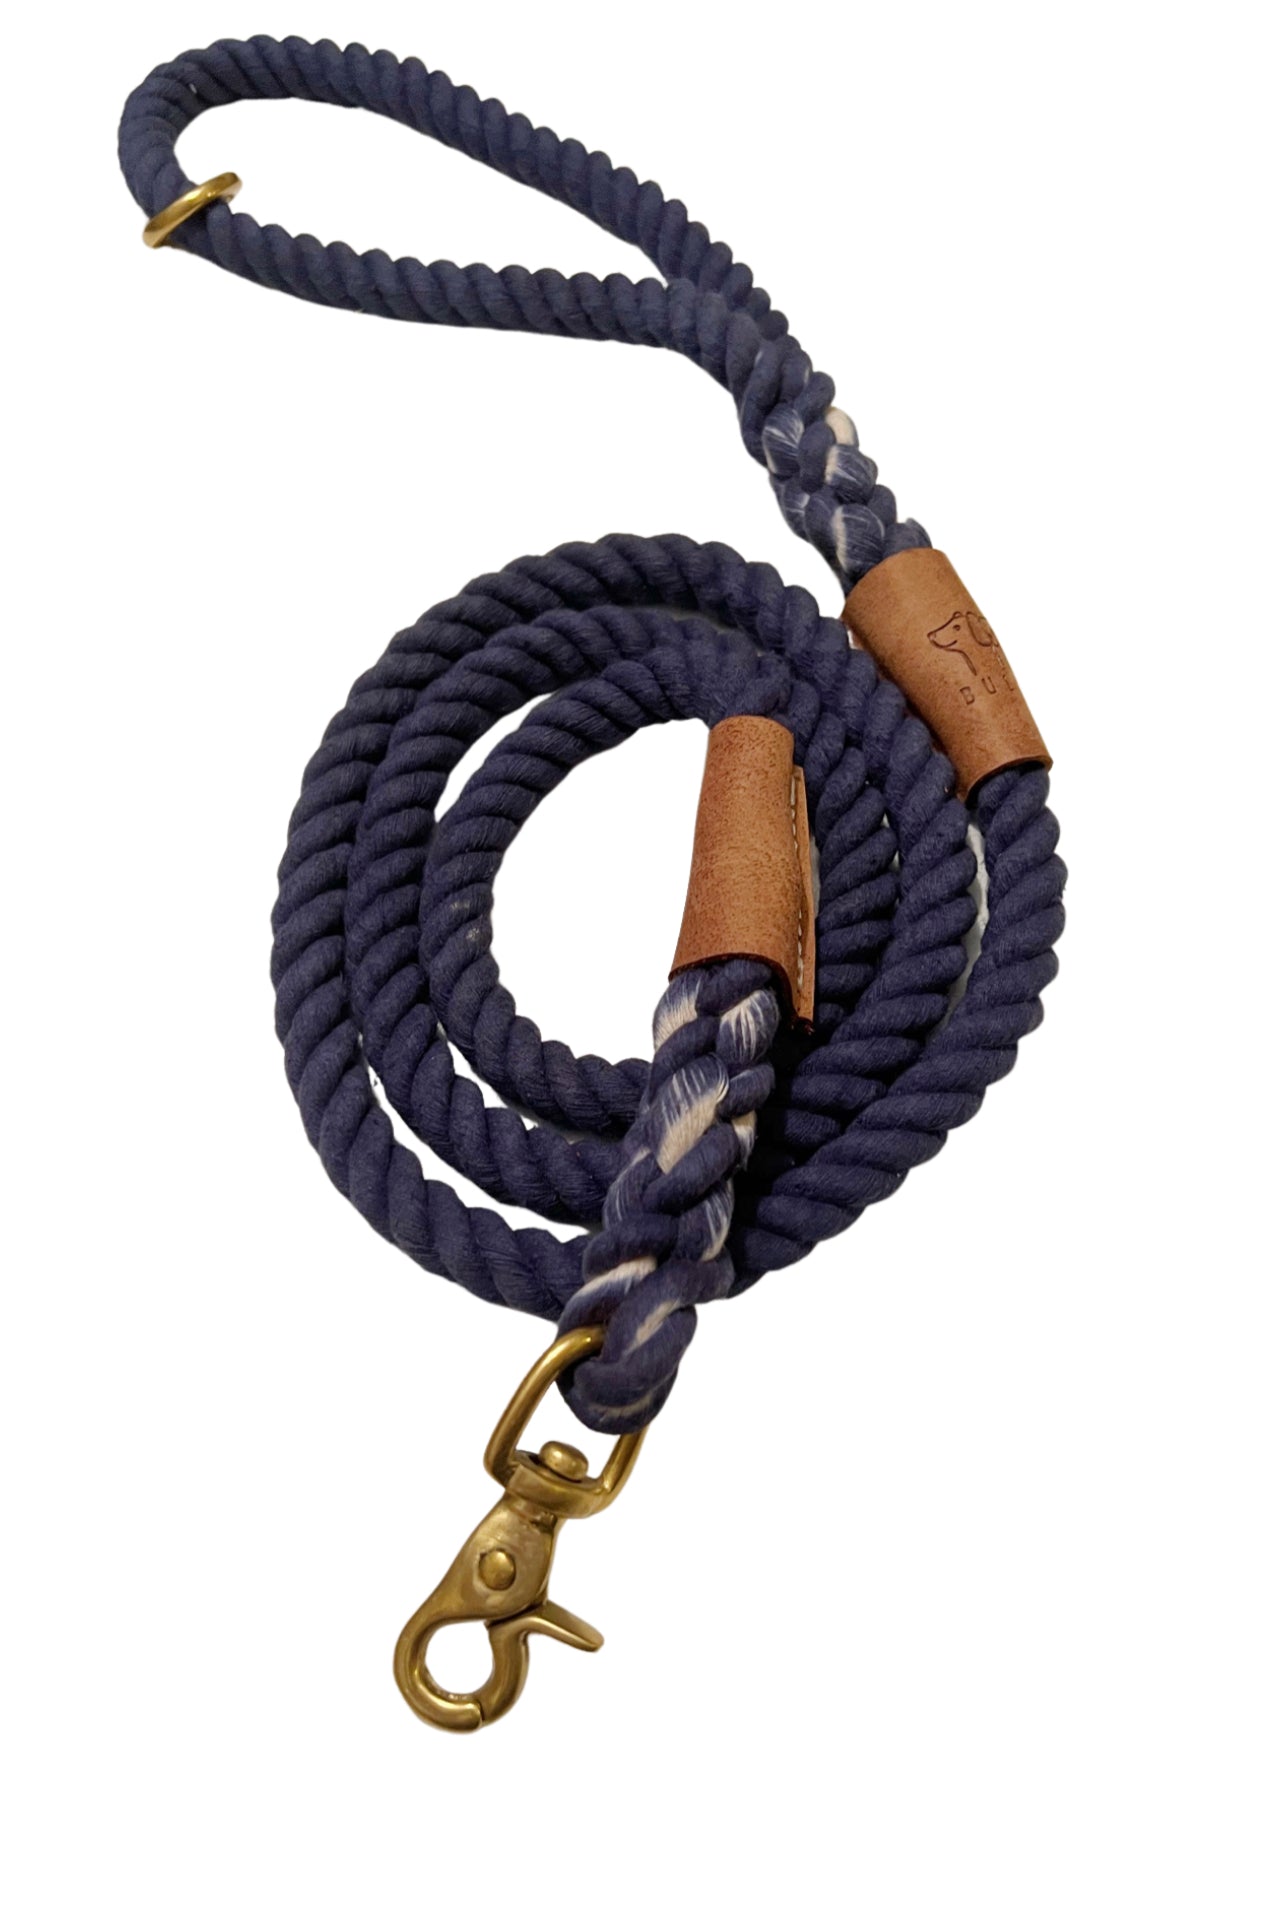 Cotton Rope Dog Leash, Buy Now